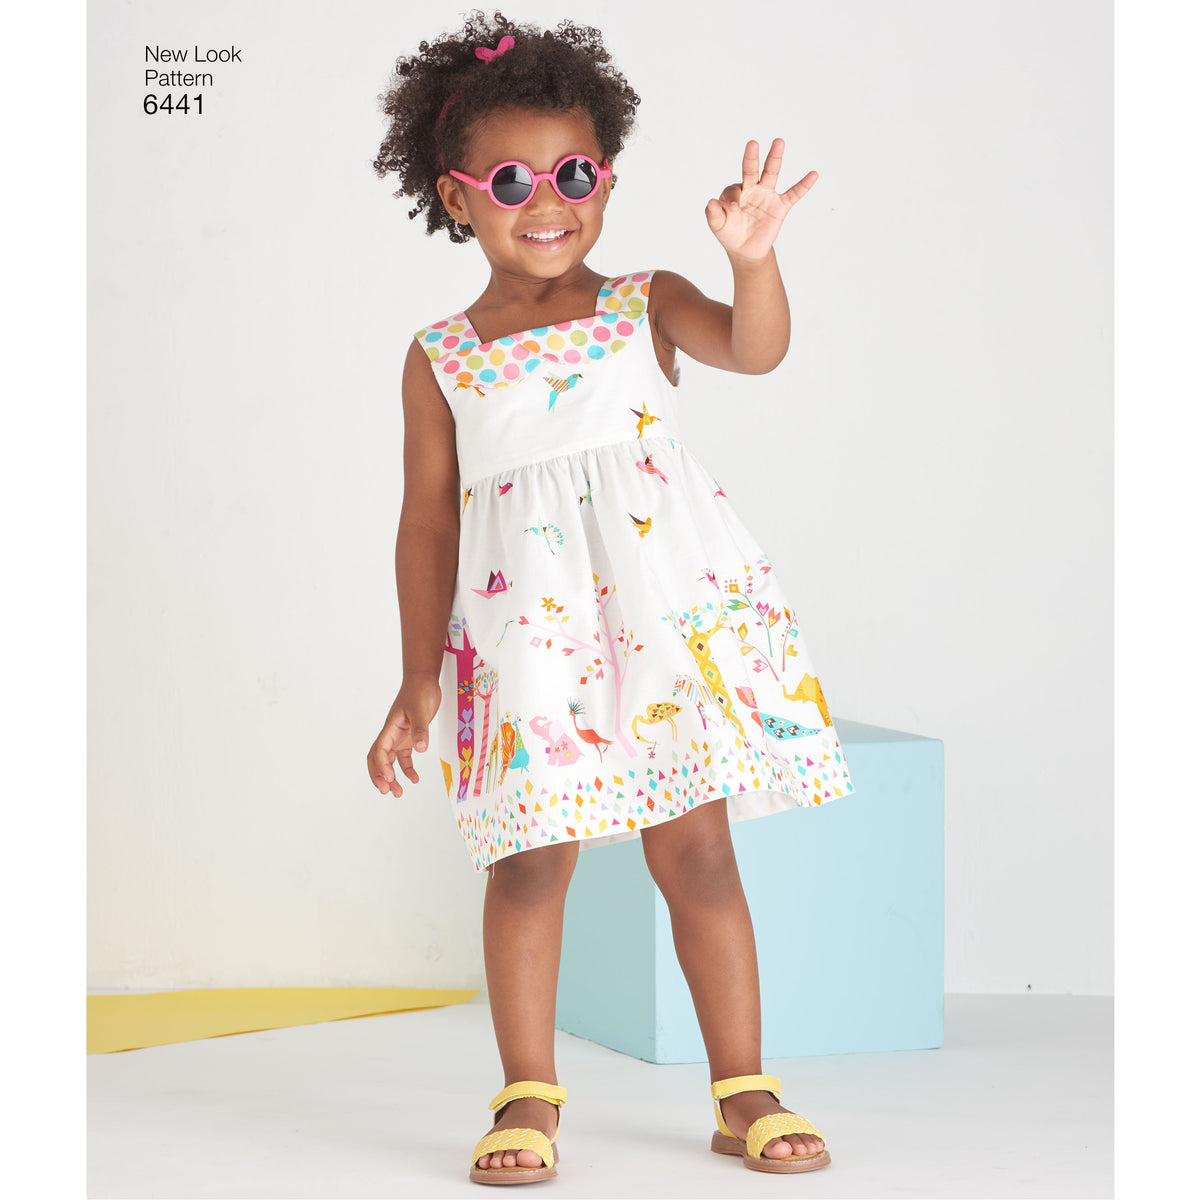 New Look 6441 Toddlers' Easy Dresses, Top and Cropped Pants pattern ...